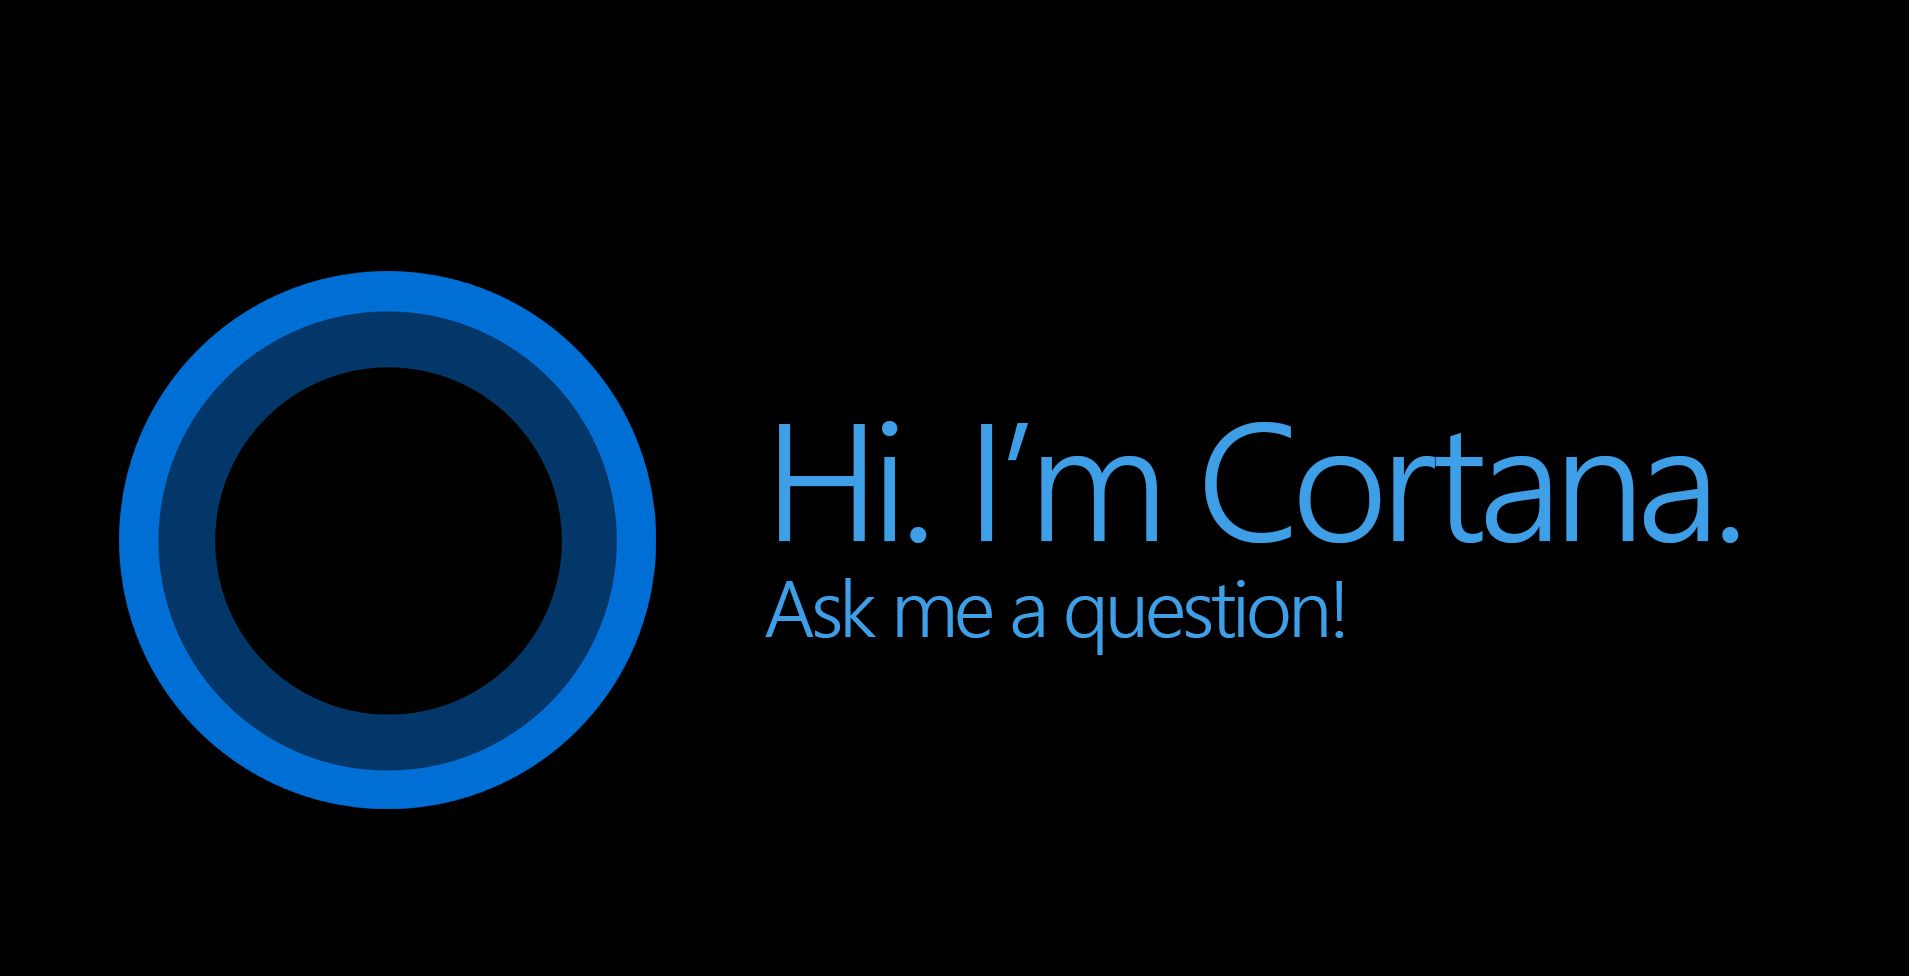 Microsoft Cortana 2 Microsoft Says Cortana Is In Early Days, Plans To Outsmart Alexa